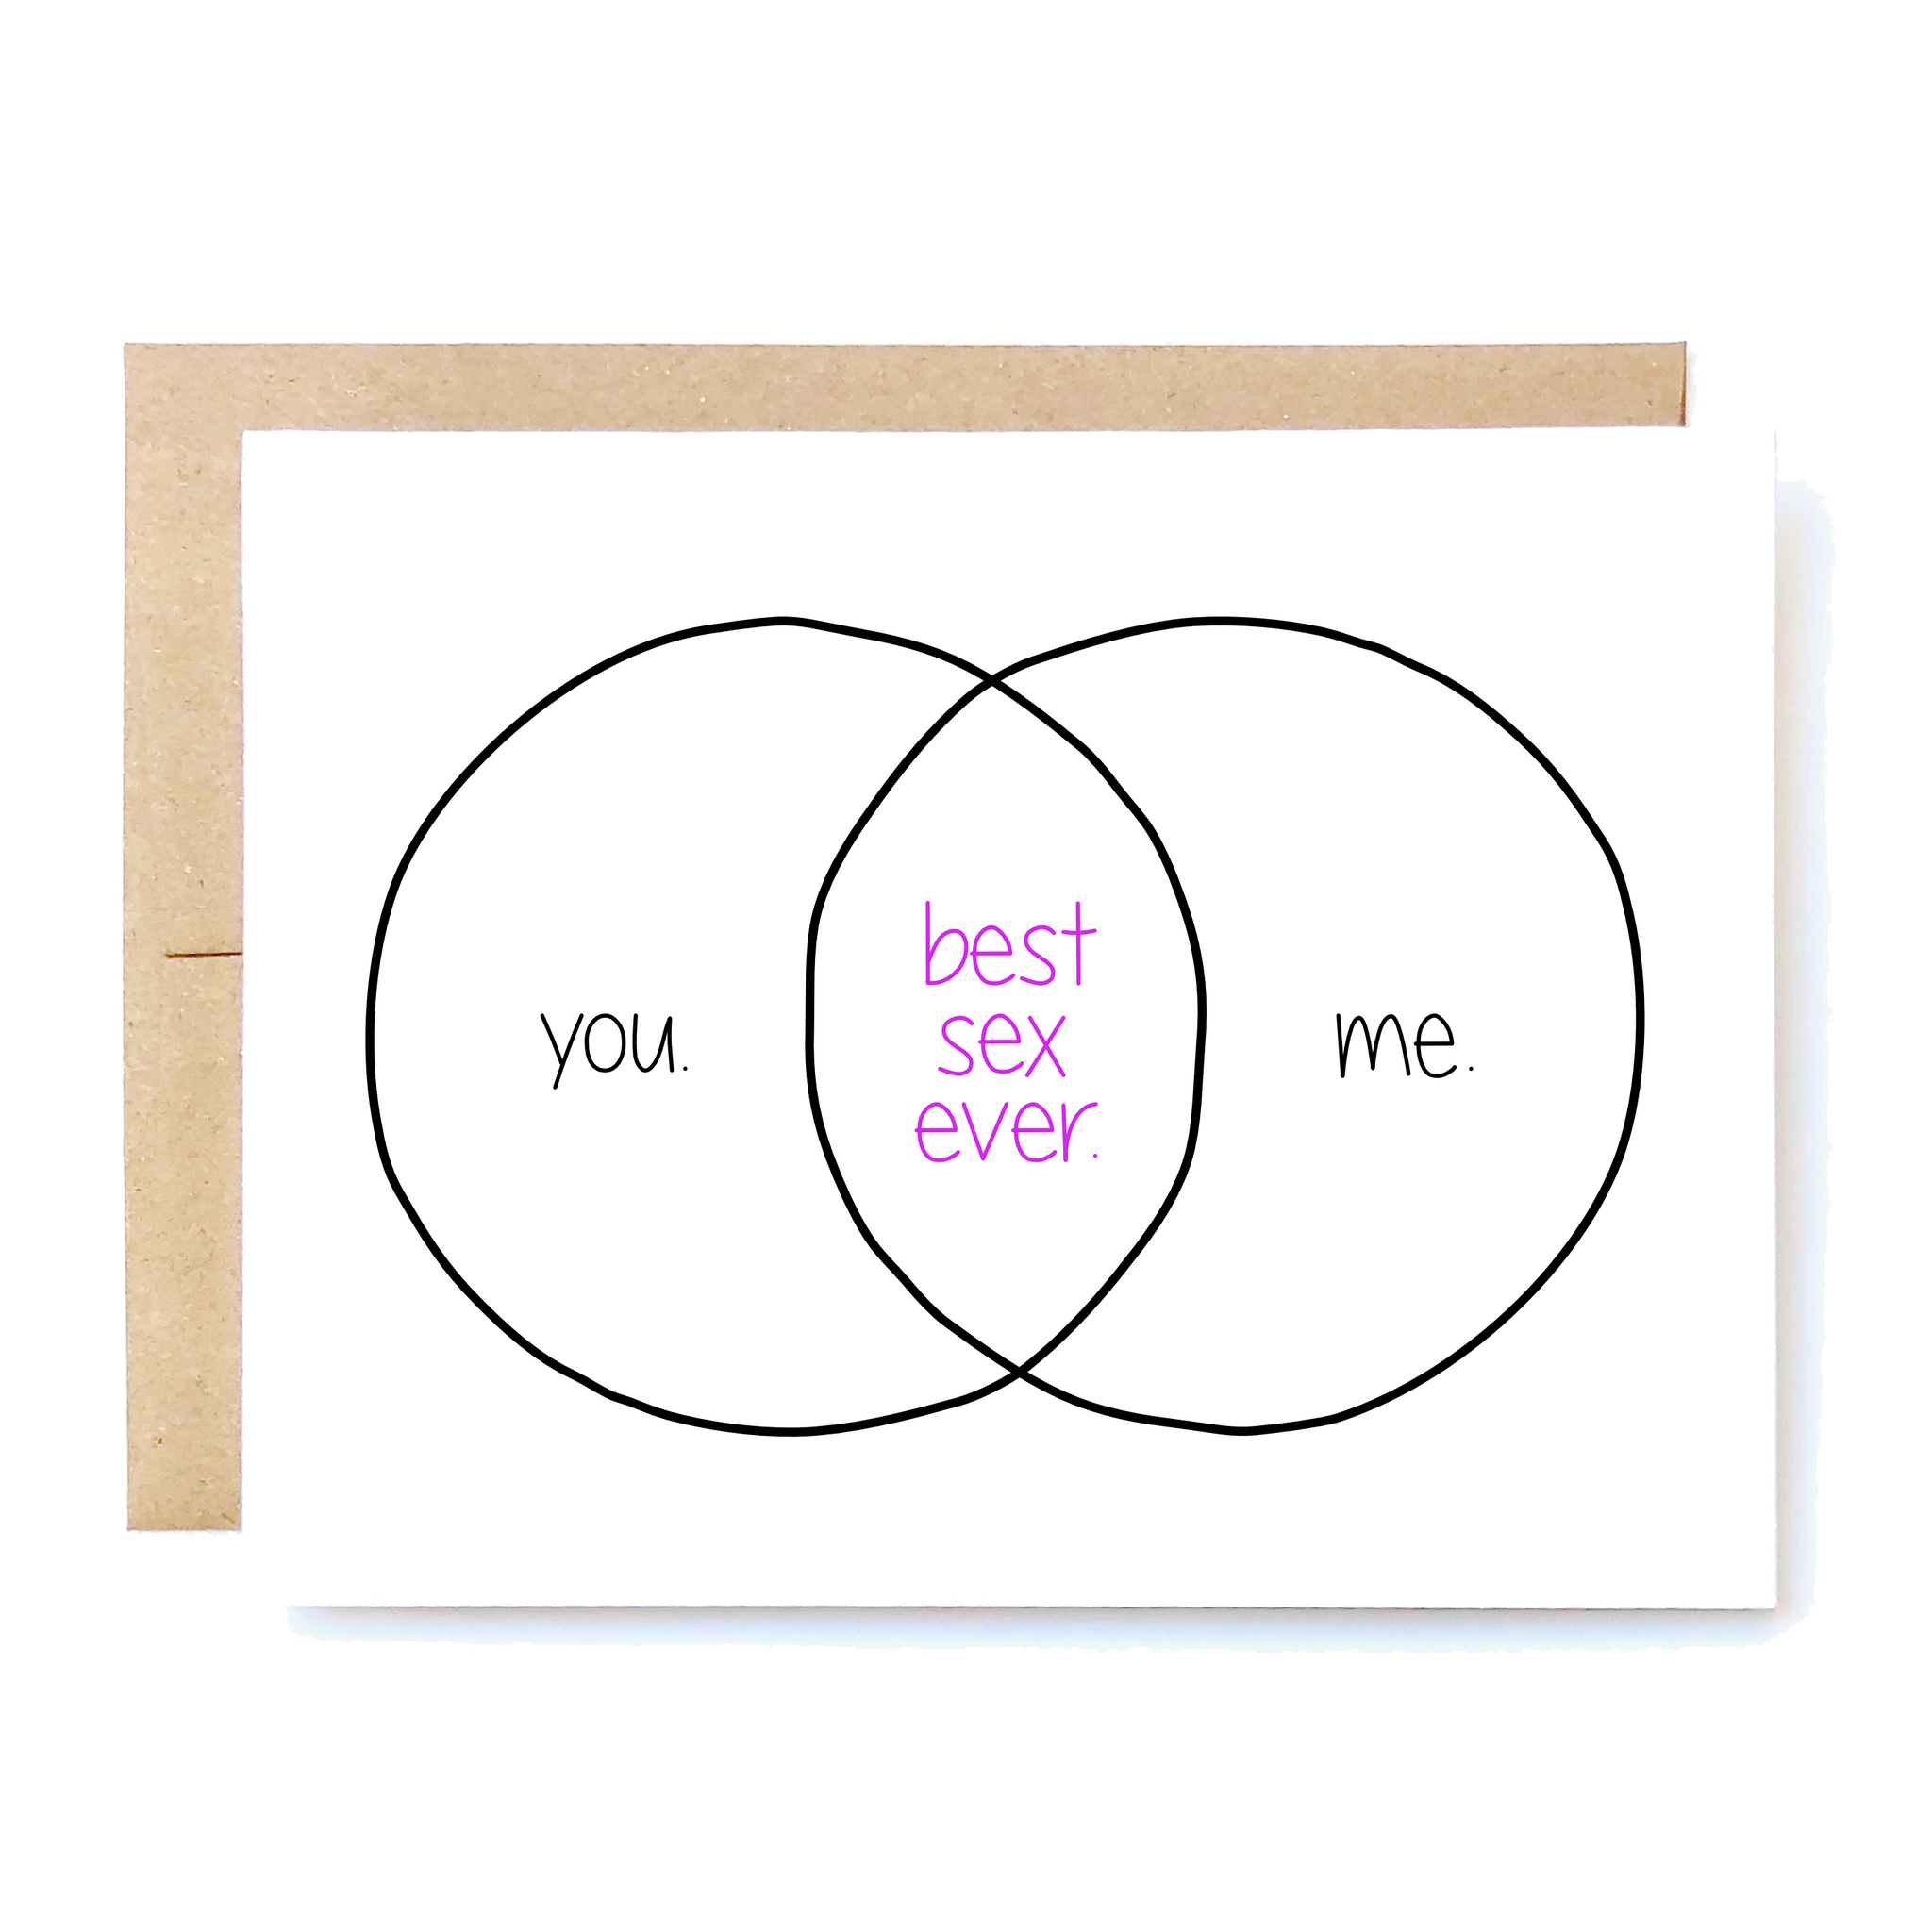 Card Front: You. Me. Best Sex Ever.